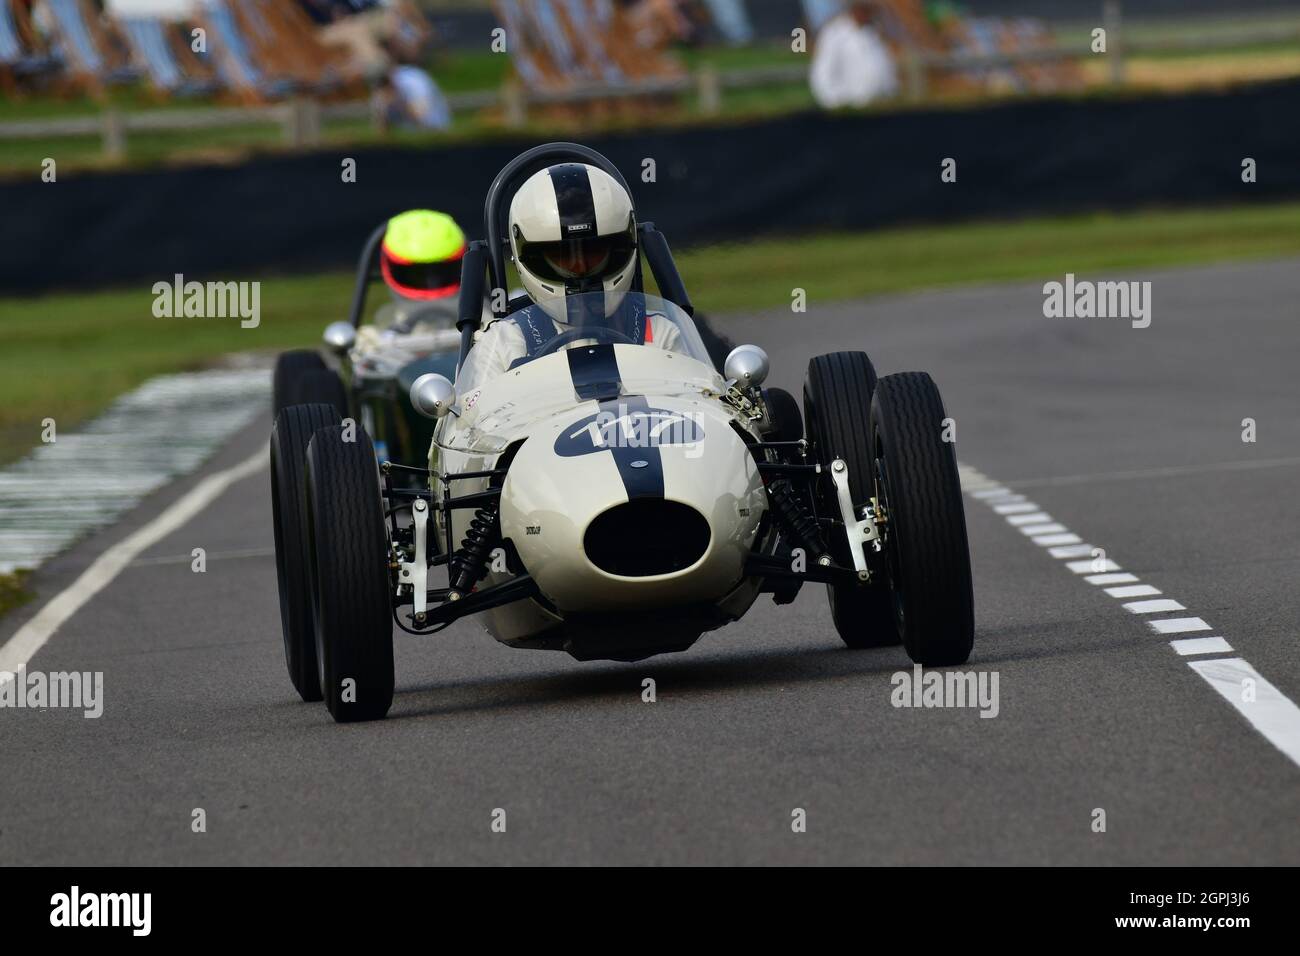 Simon Goodliff, Nike-BMC MK1, Chichester Cup, Front engined Formula Juniors  that raced in the years 1958 to 1962, Goodwood Revival 2021, Goodwood, Chi  Stock Photo - Alamy